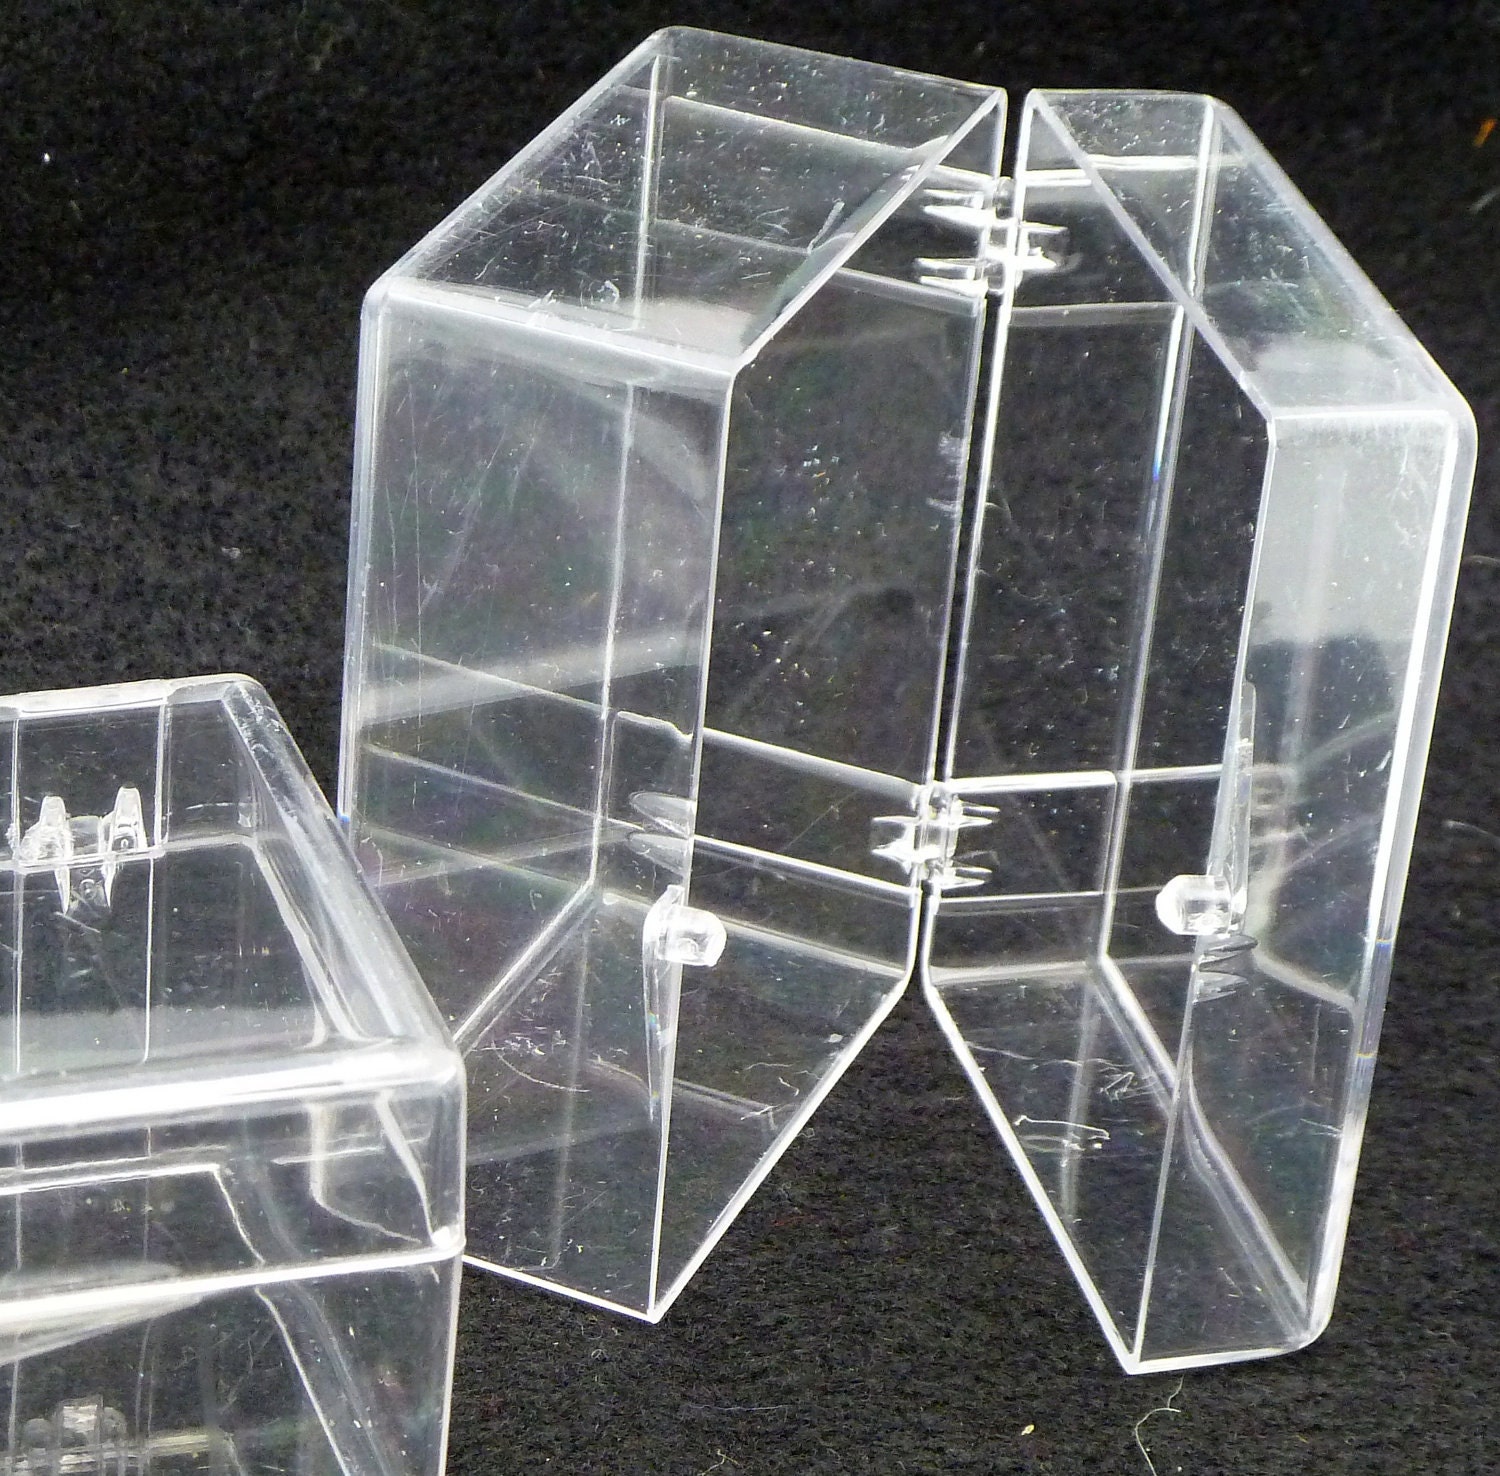 Lot 12 clear plastic boxes trunks hinged lid snap closer